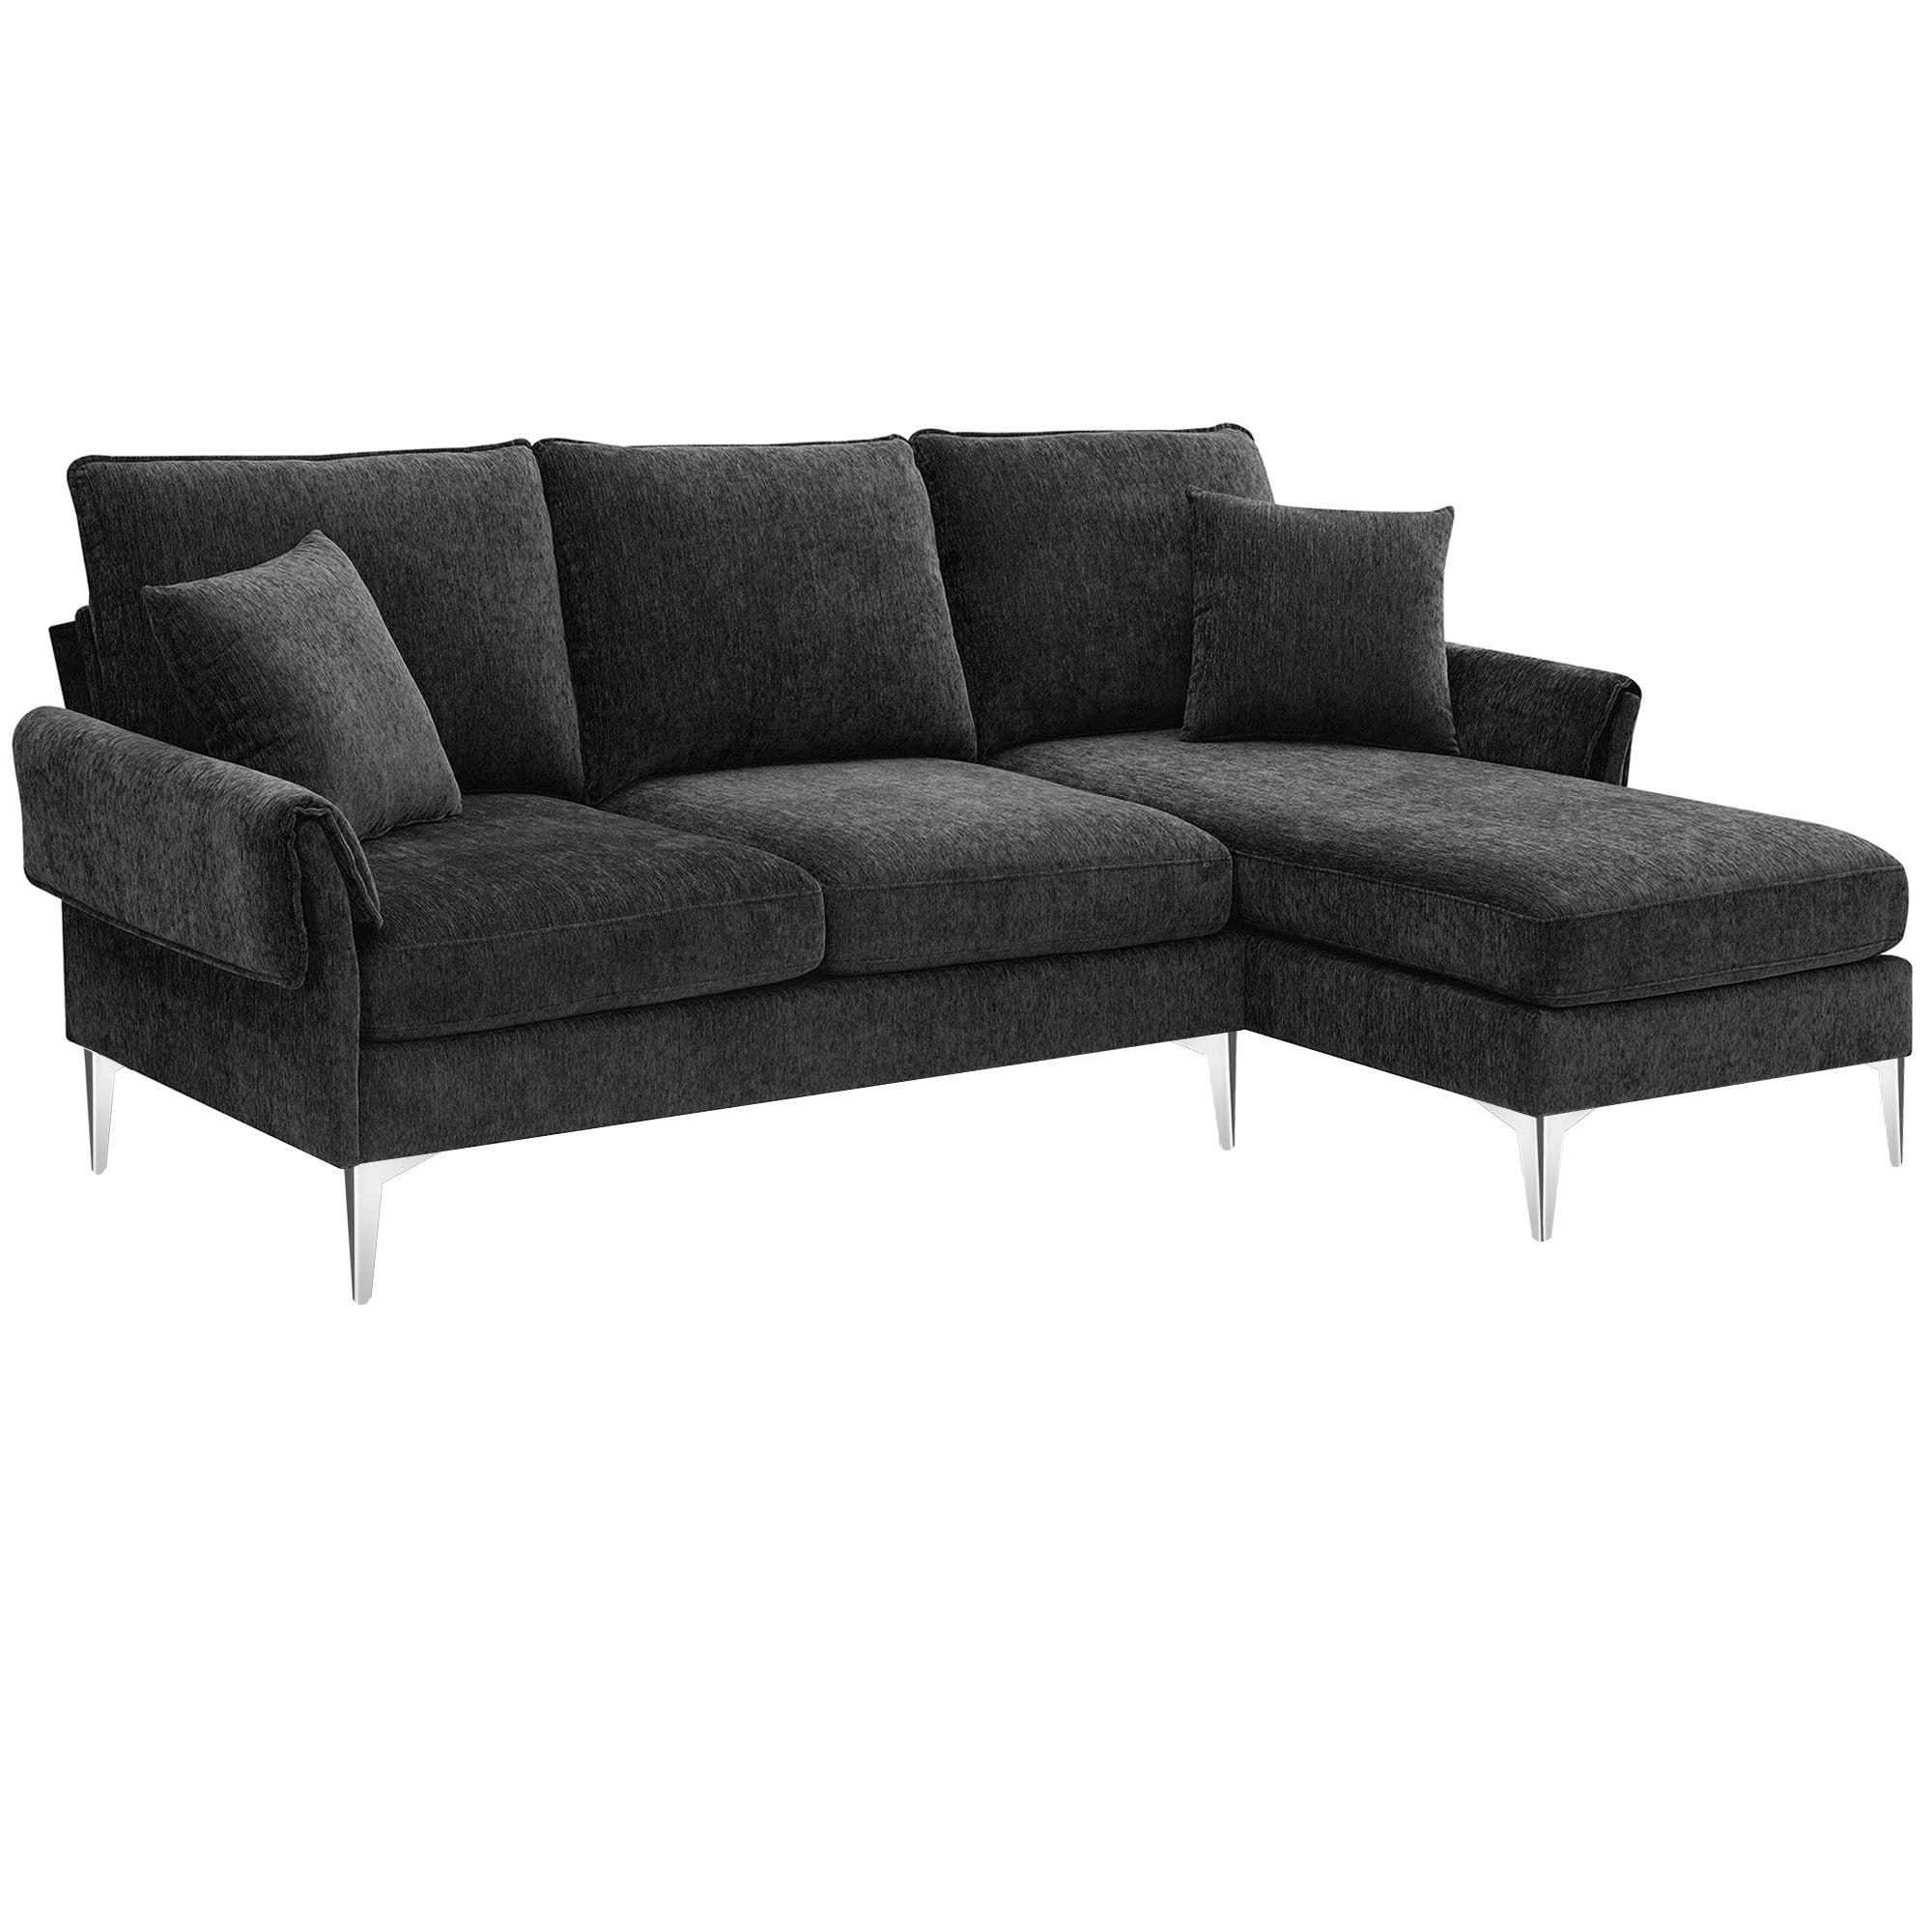 84 " Convertible Sectional Sofa, Modern Chenille L-Shaped Sofa Couch with Reversible Chaise Lounge, Fit for Living Room, Apartment (2 Pillows) - Black